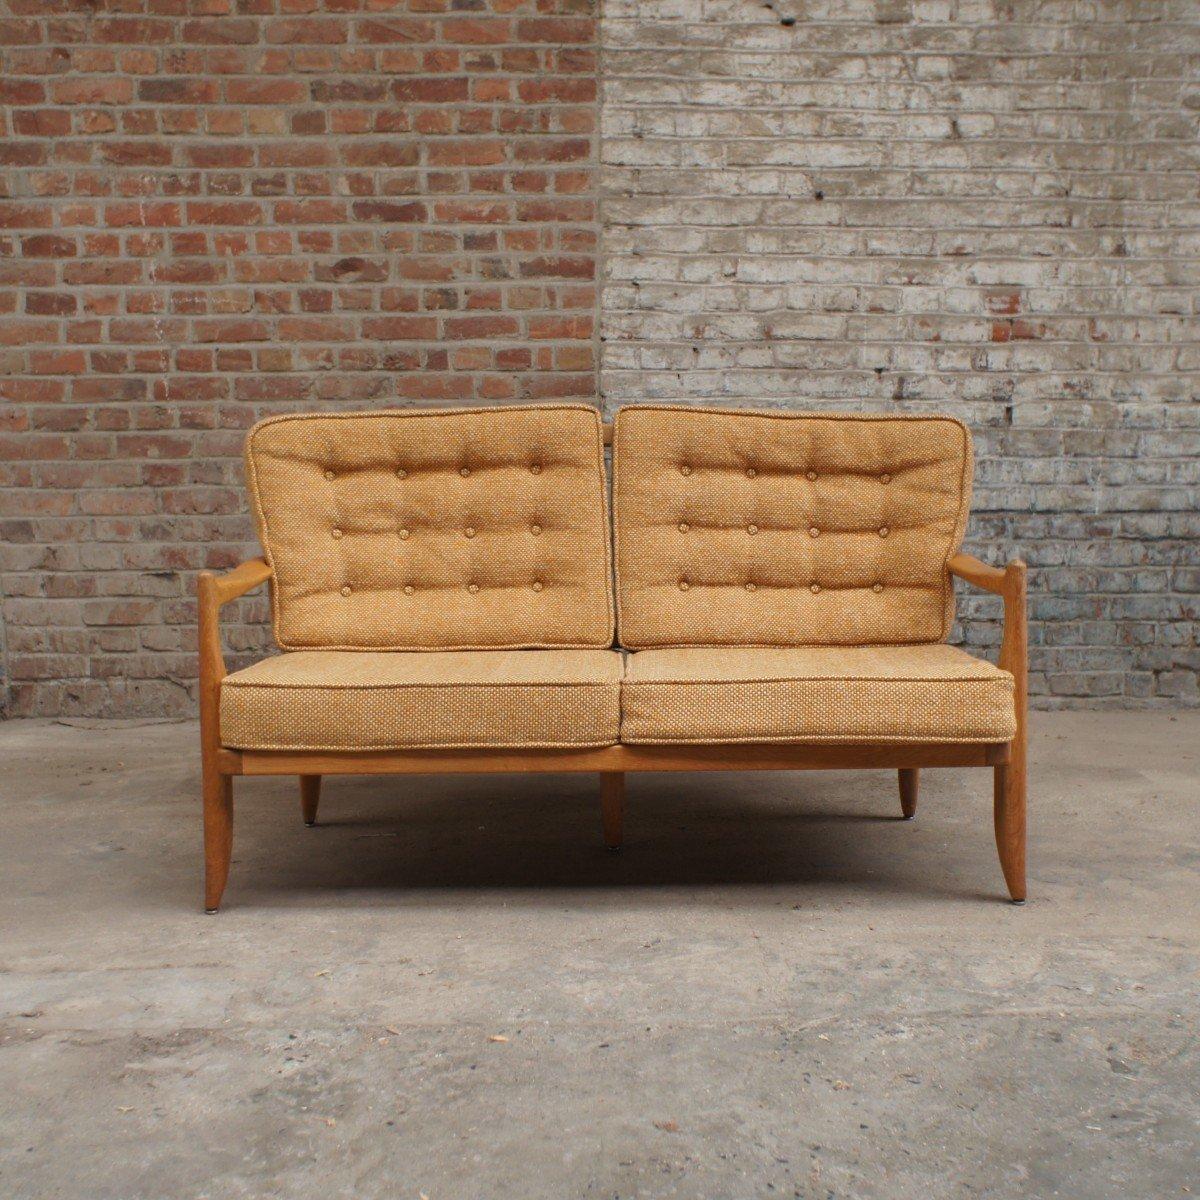 Mid-Century Modern Vintage Sofa In Light Oak, Guillerme And Chambron